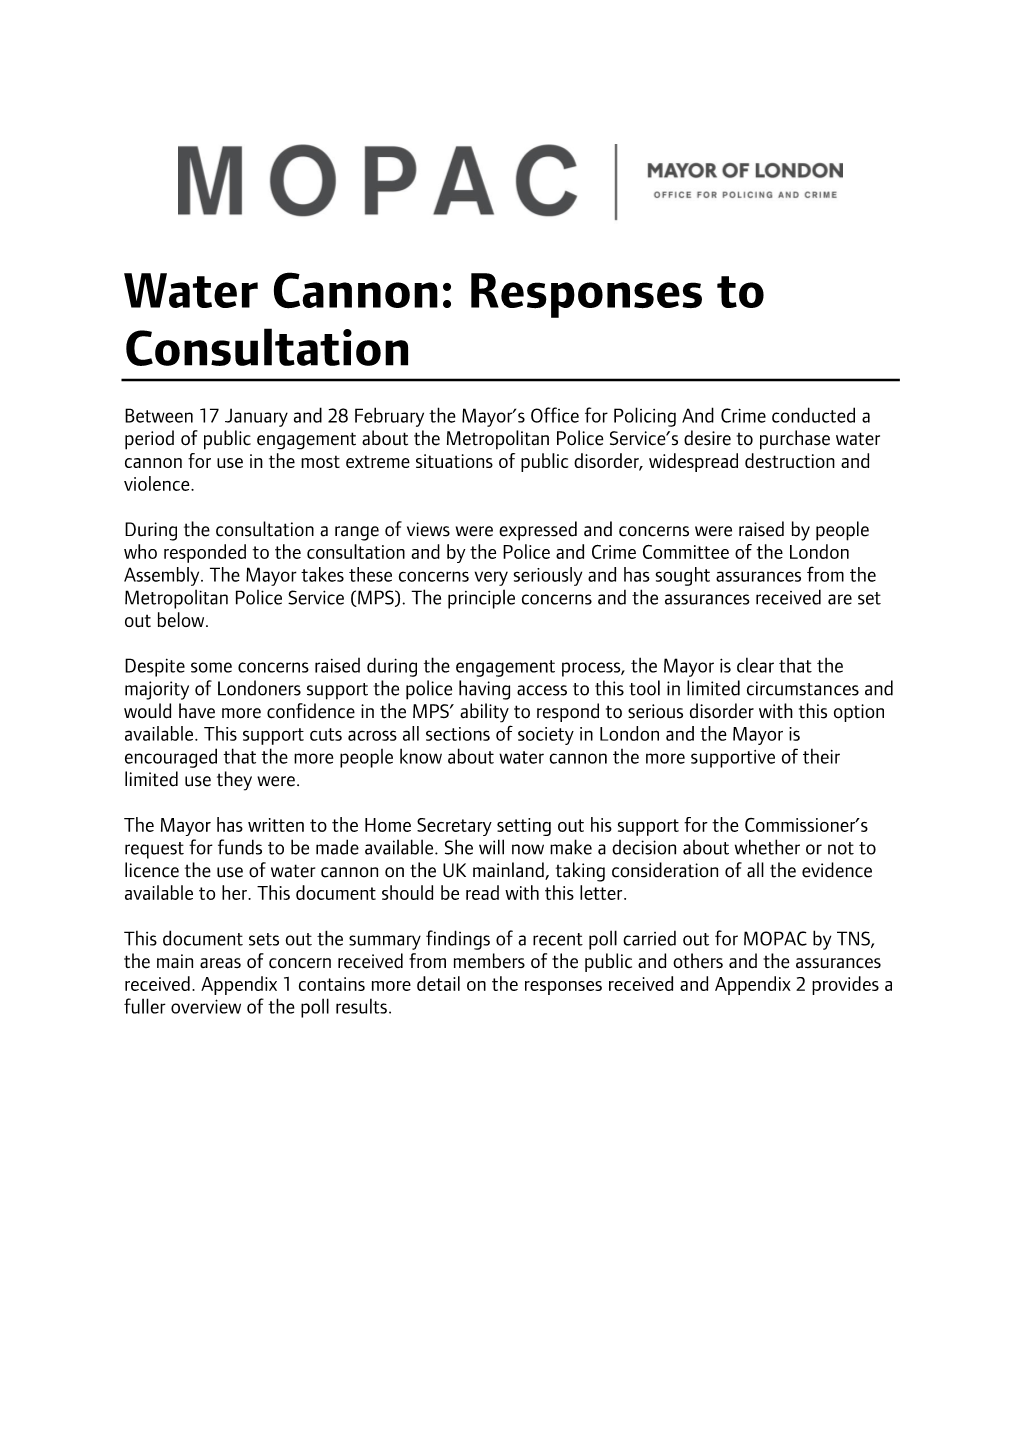 Water Cannon: Responses to Consultation